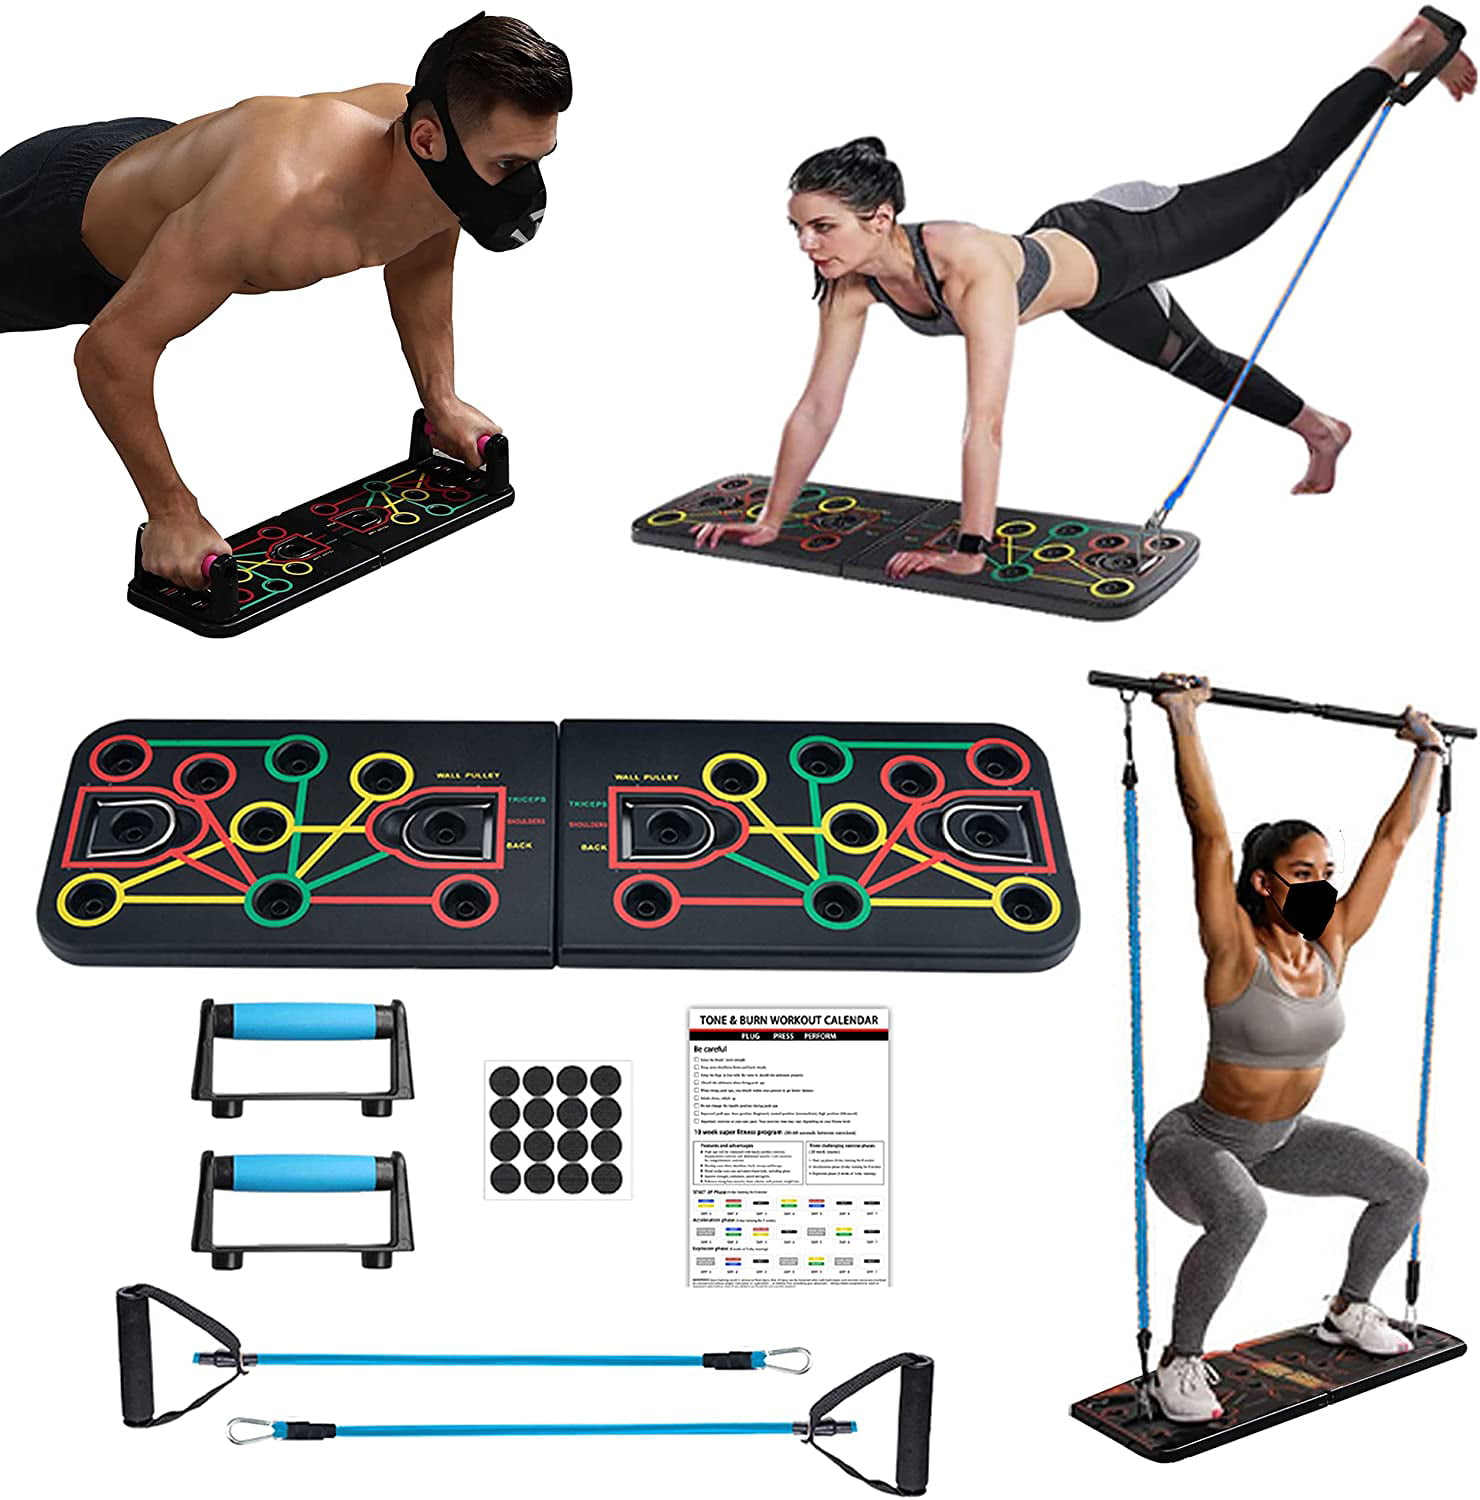 Push Up Board Portable Burnout Challenge Board with Handles Push up Home Exercise Gym Equipment for Men Women Pushup Board Fitness Strength Resistance Training 